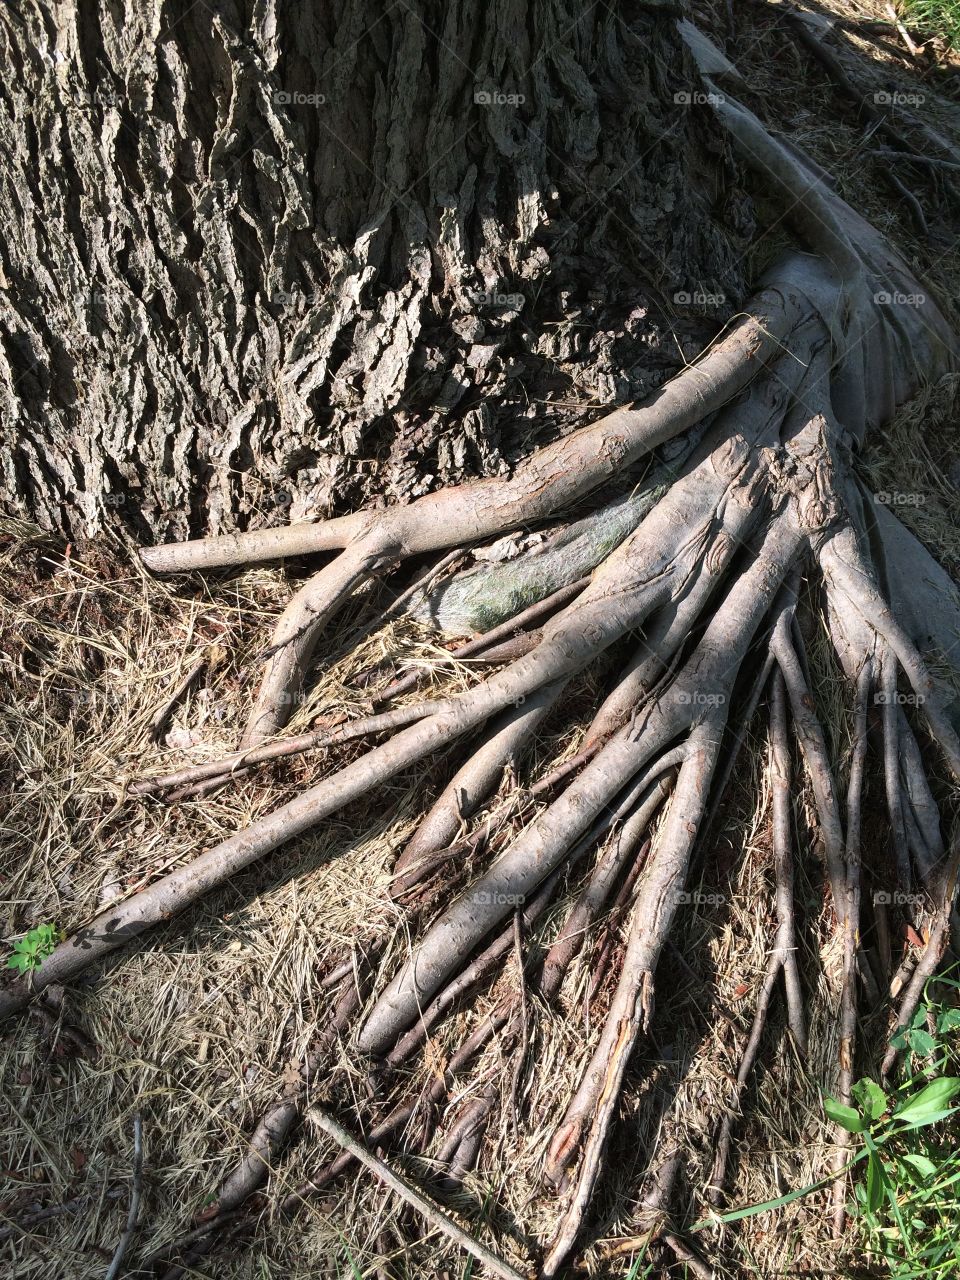 Roots
